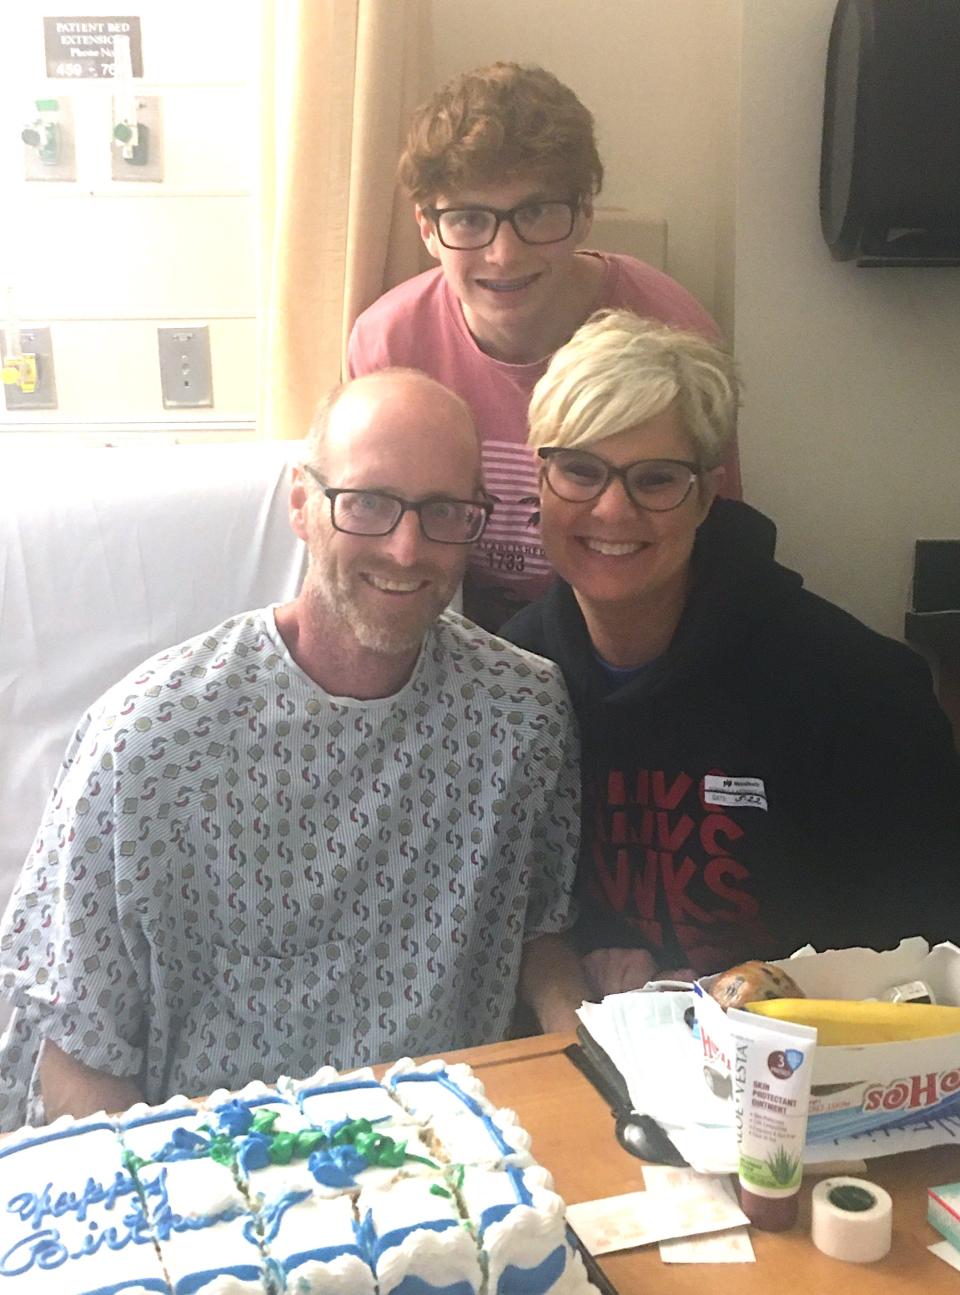 Nevin Mishler celebrates his 49th birthday in the hospital last summer with his wife Kari and their son Caleb.